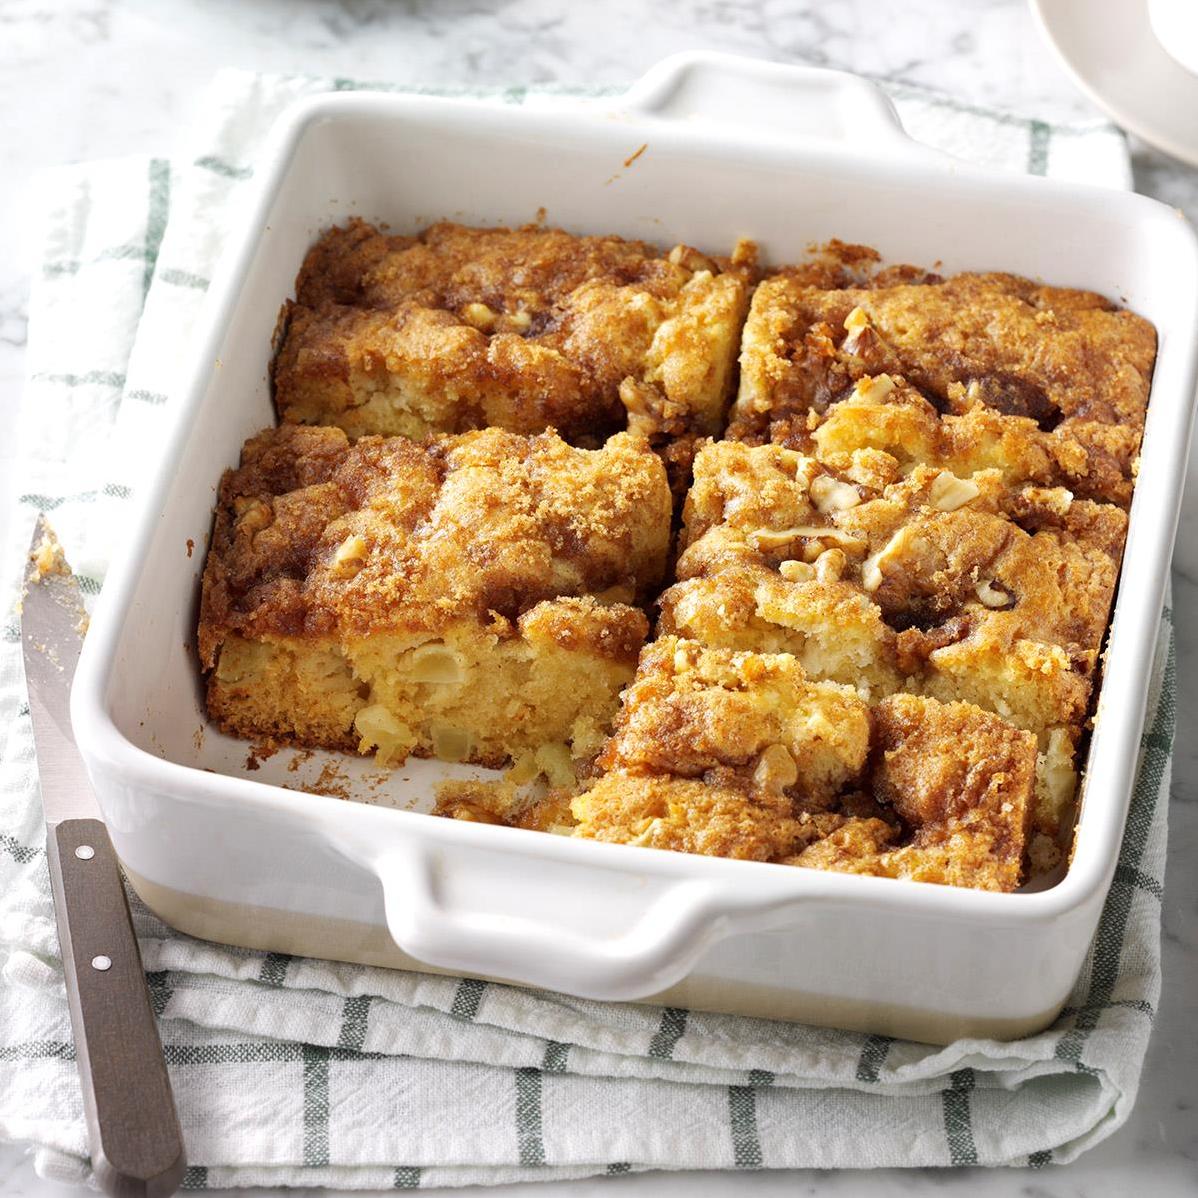  Fall in love with this apple coffee cake!